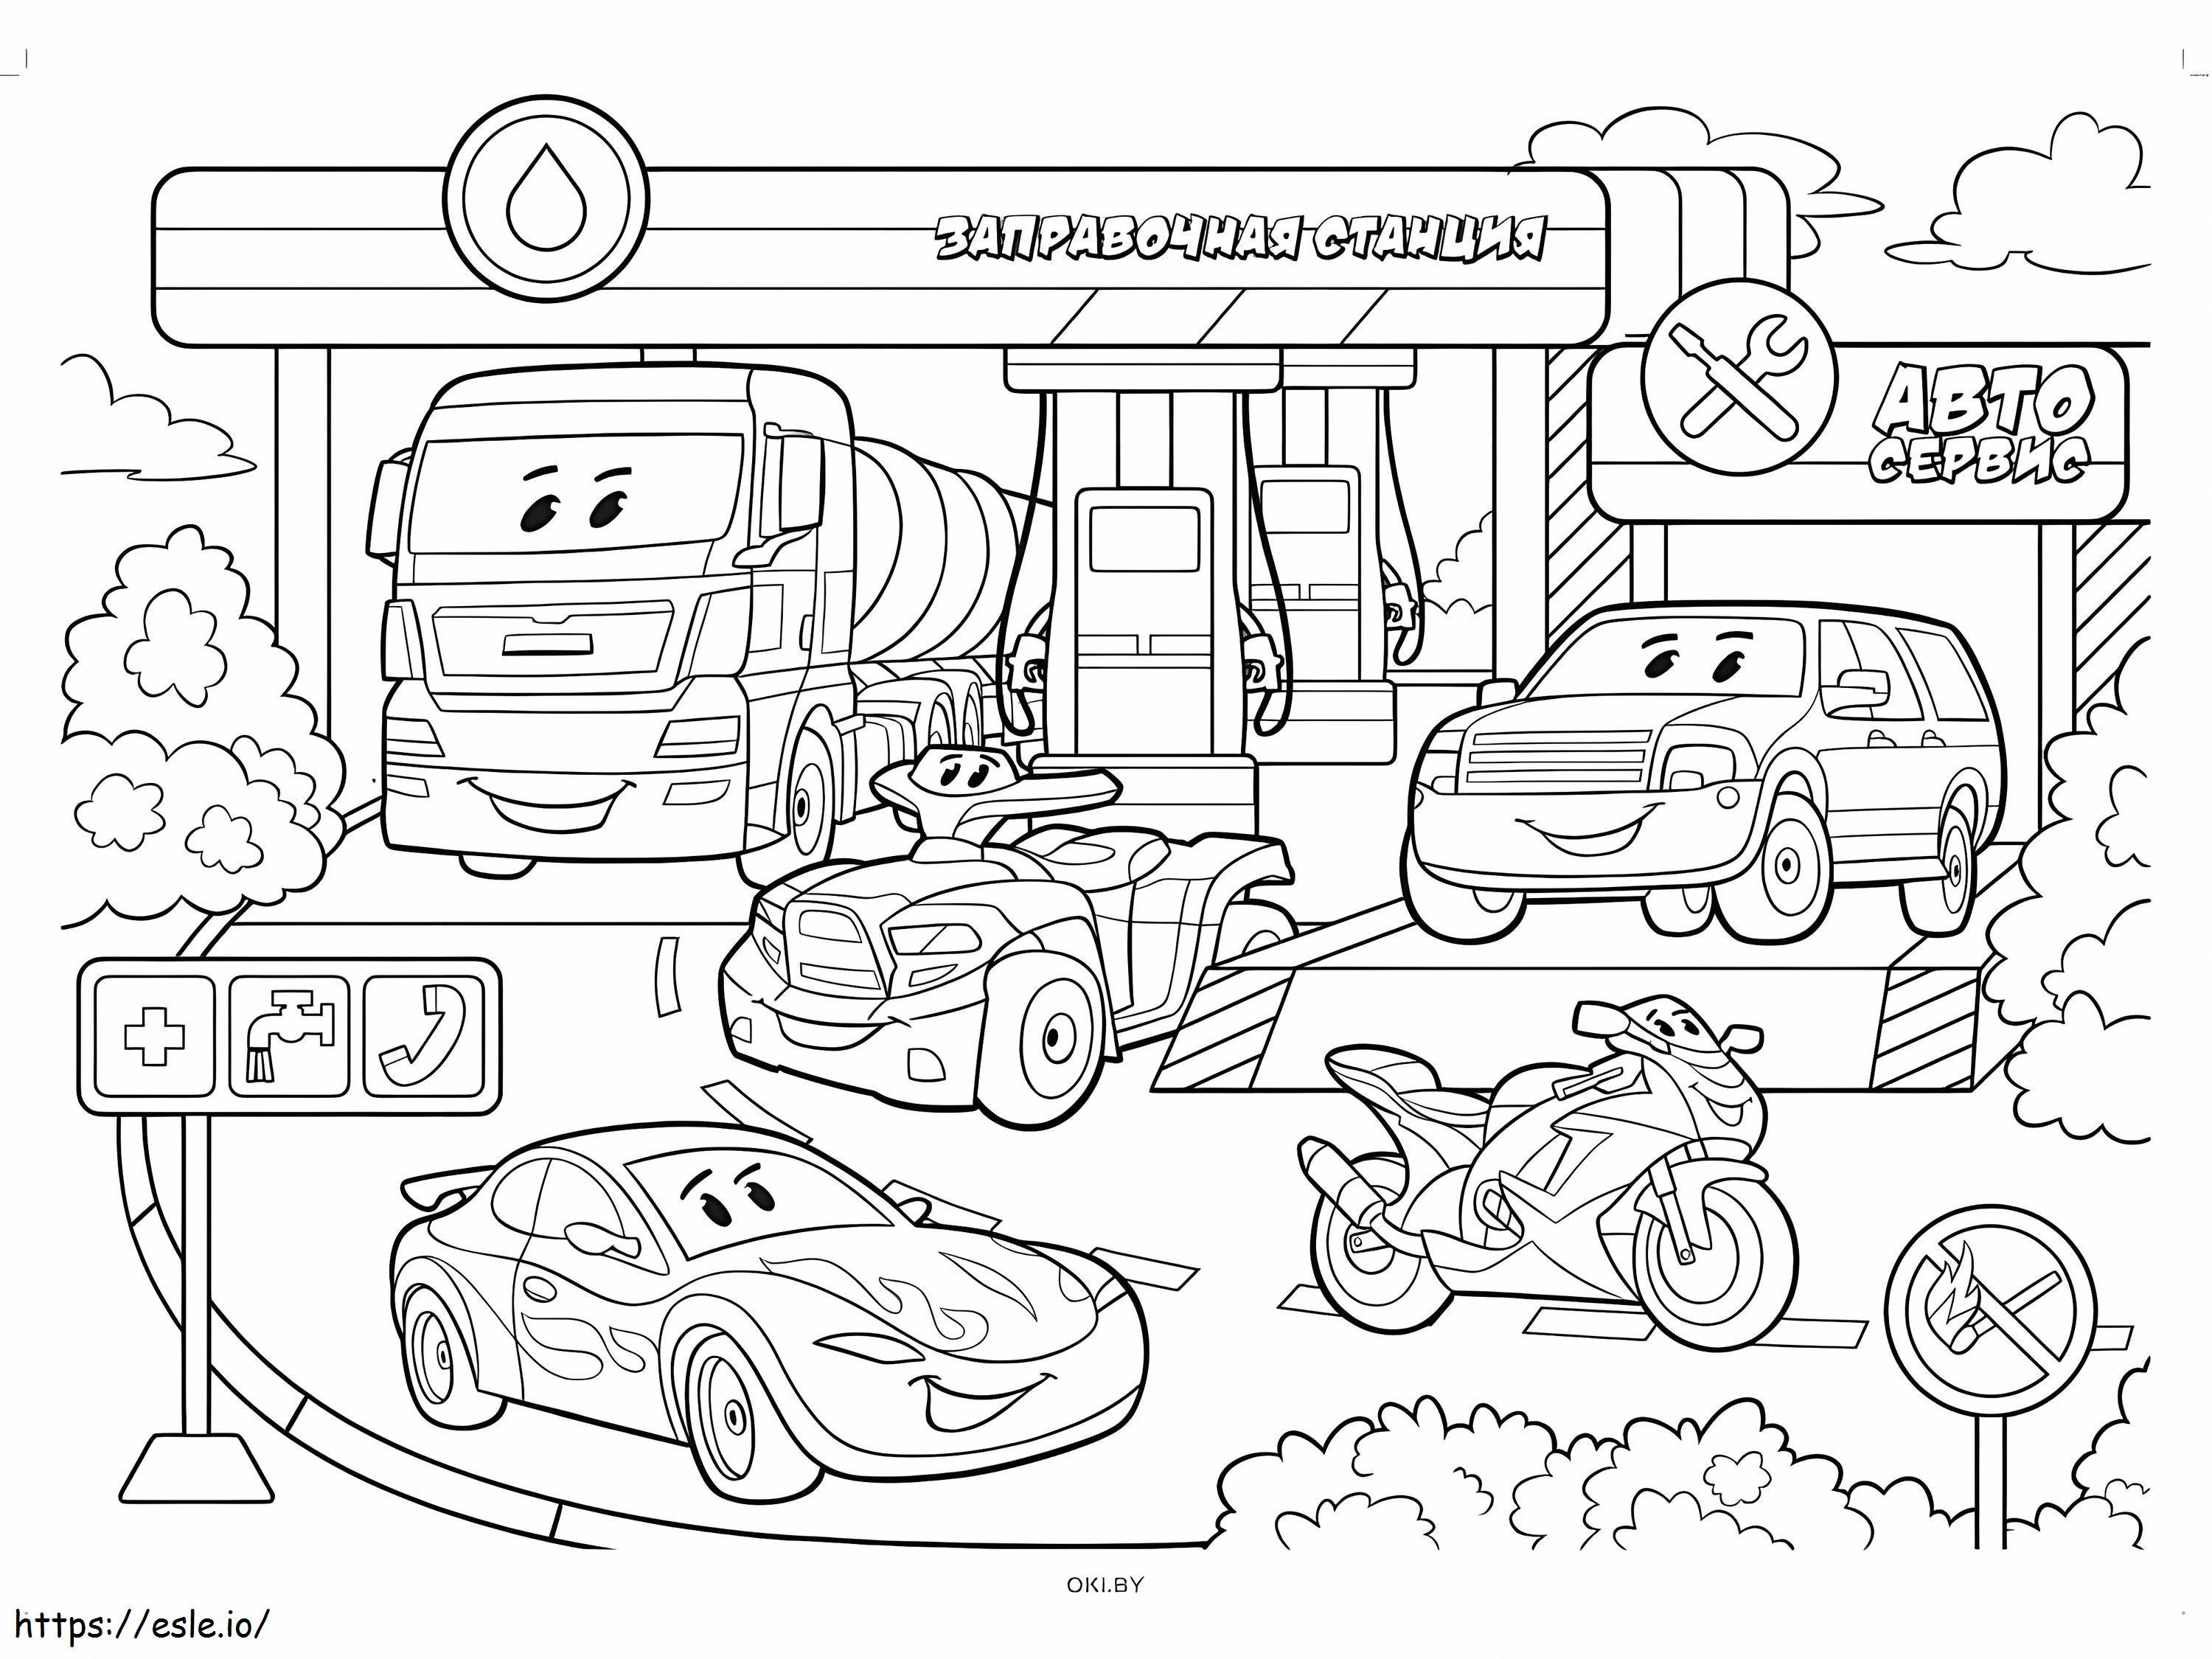 Funny Gas Station coloring page